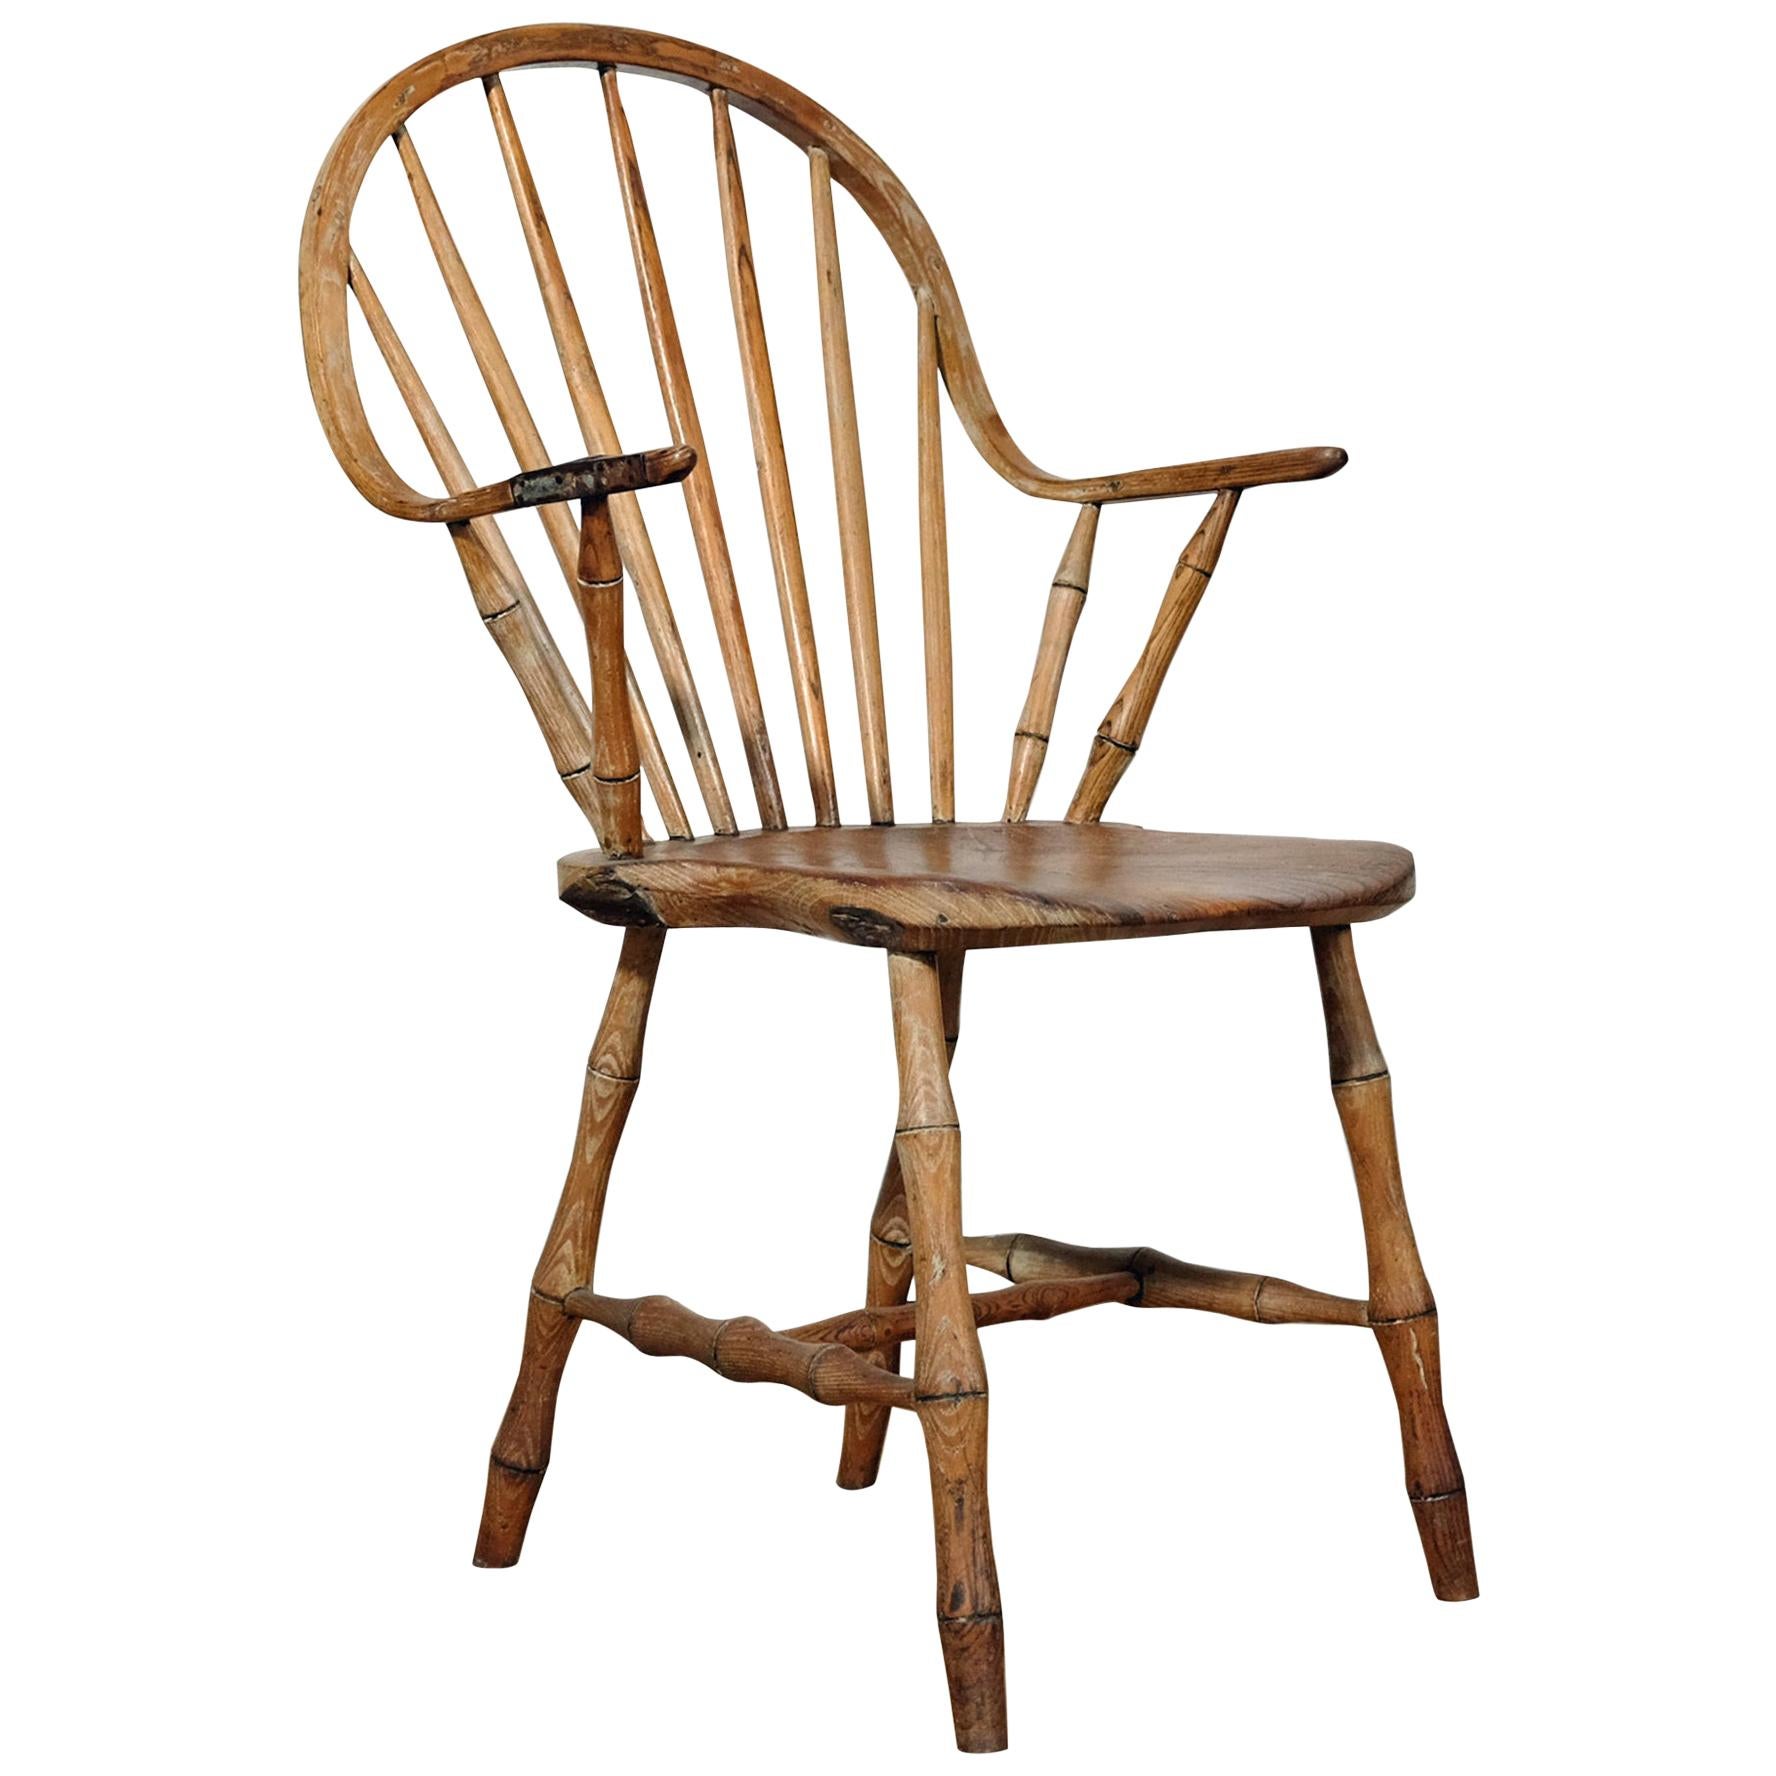 Continuous Arm Yealmpton Chair, English Windsor Armchair, Faux Bamboo, 1820s